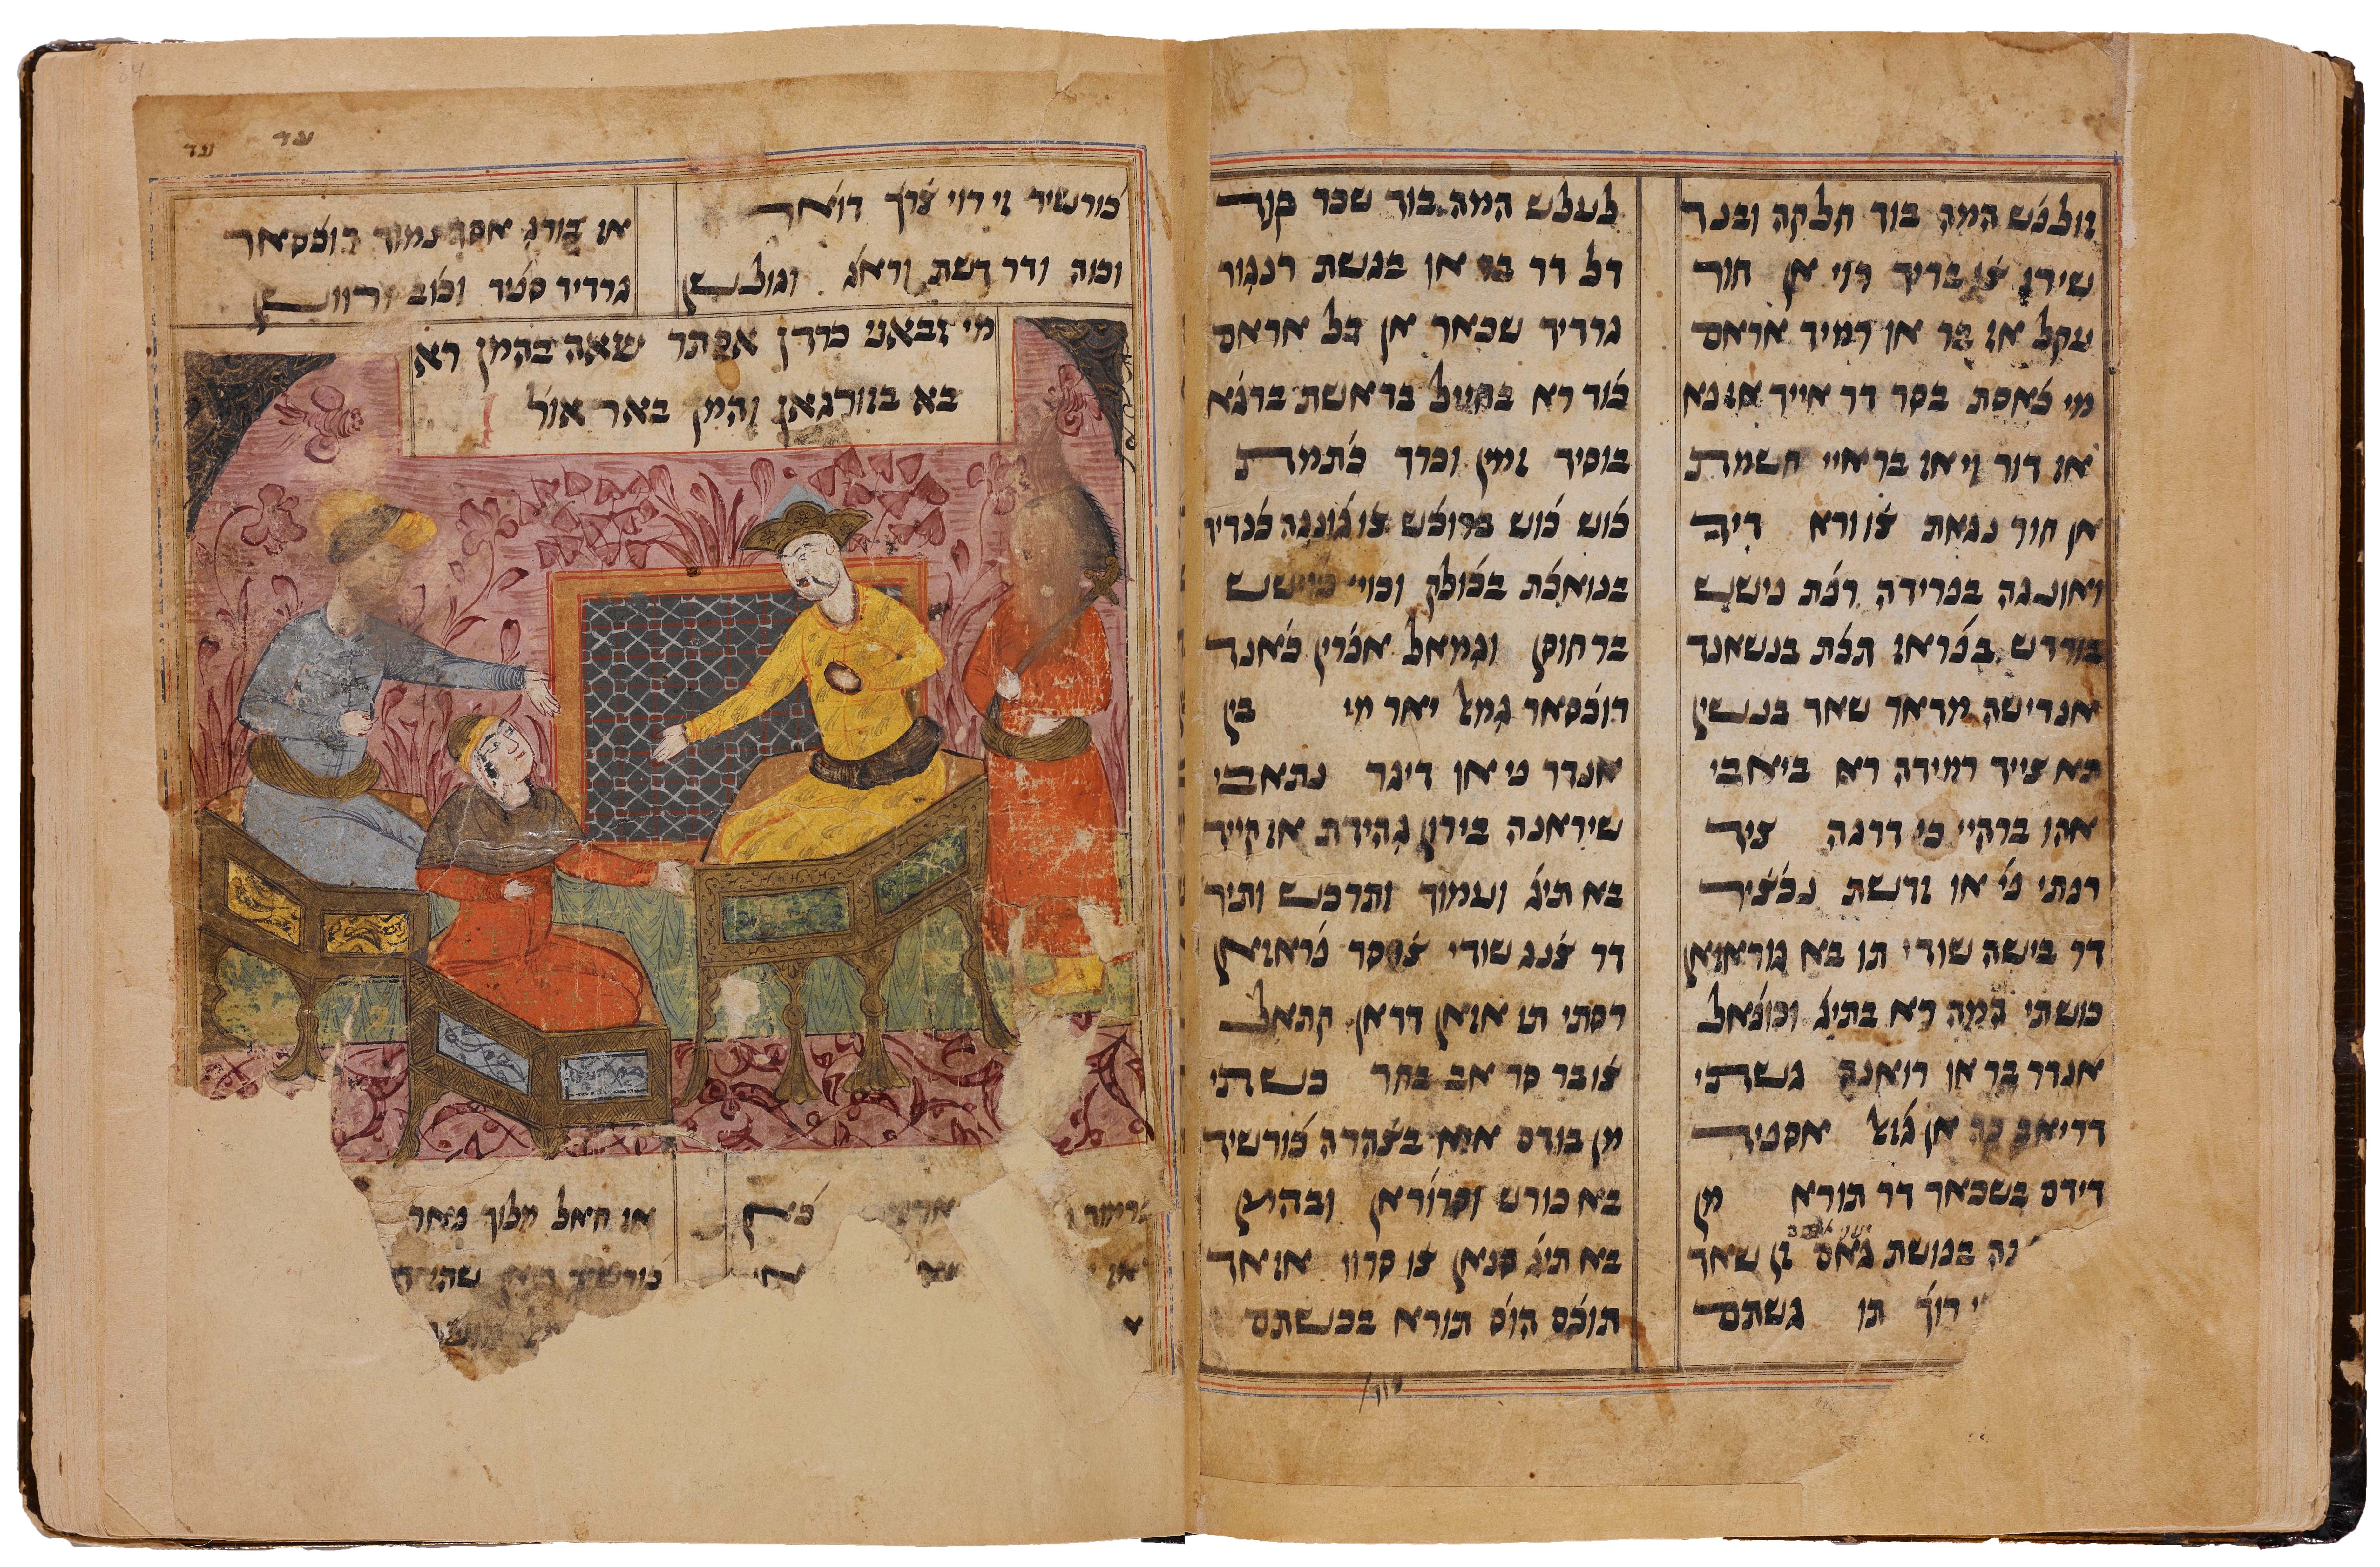 Queen Esther entertains the King in the presence of courtiers, Ardashirnama, late 17th century, Iran (The Library of the Jewish Theological Seminary)